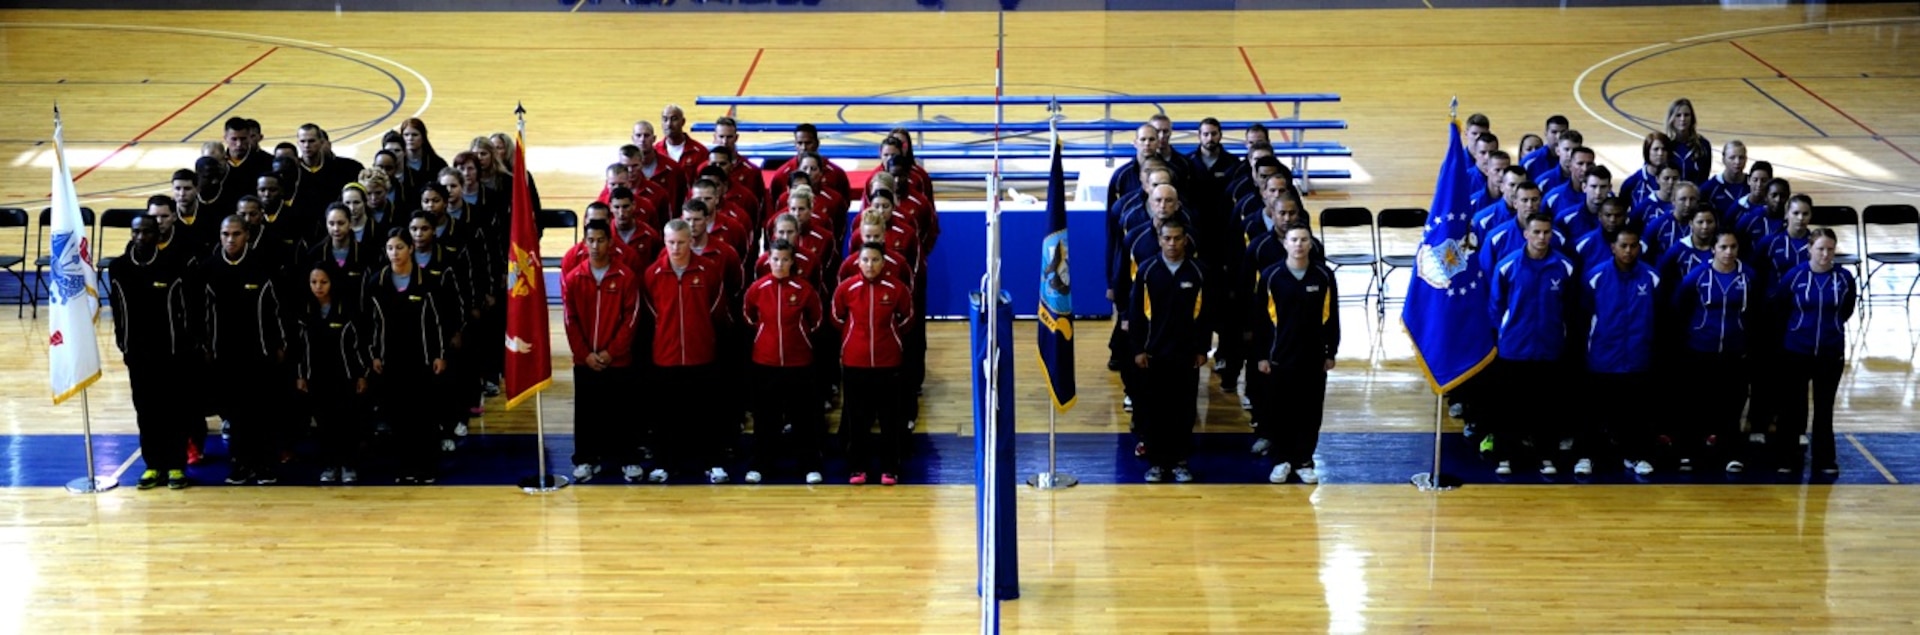 Teams from across the Services line up for the opening ceremony of the 2013 Armed Forces Indoor Volleyball Championship at Hill AFB, UT.  Army men and women took home team titles in the 2013 competition, just one week after taking both beach volleyball golds.